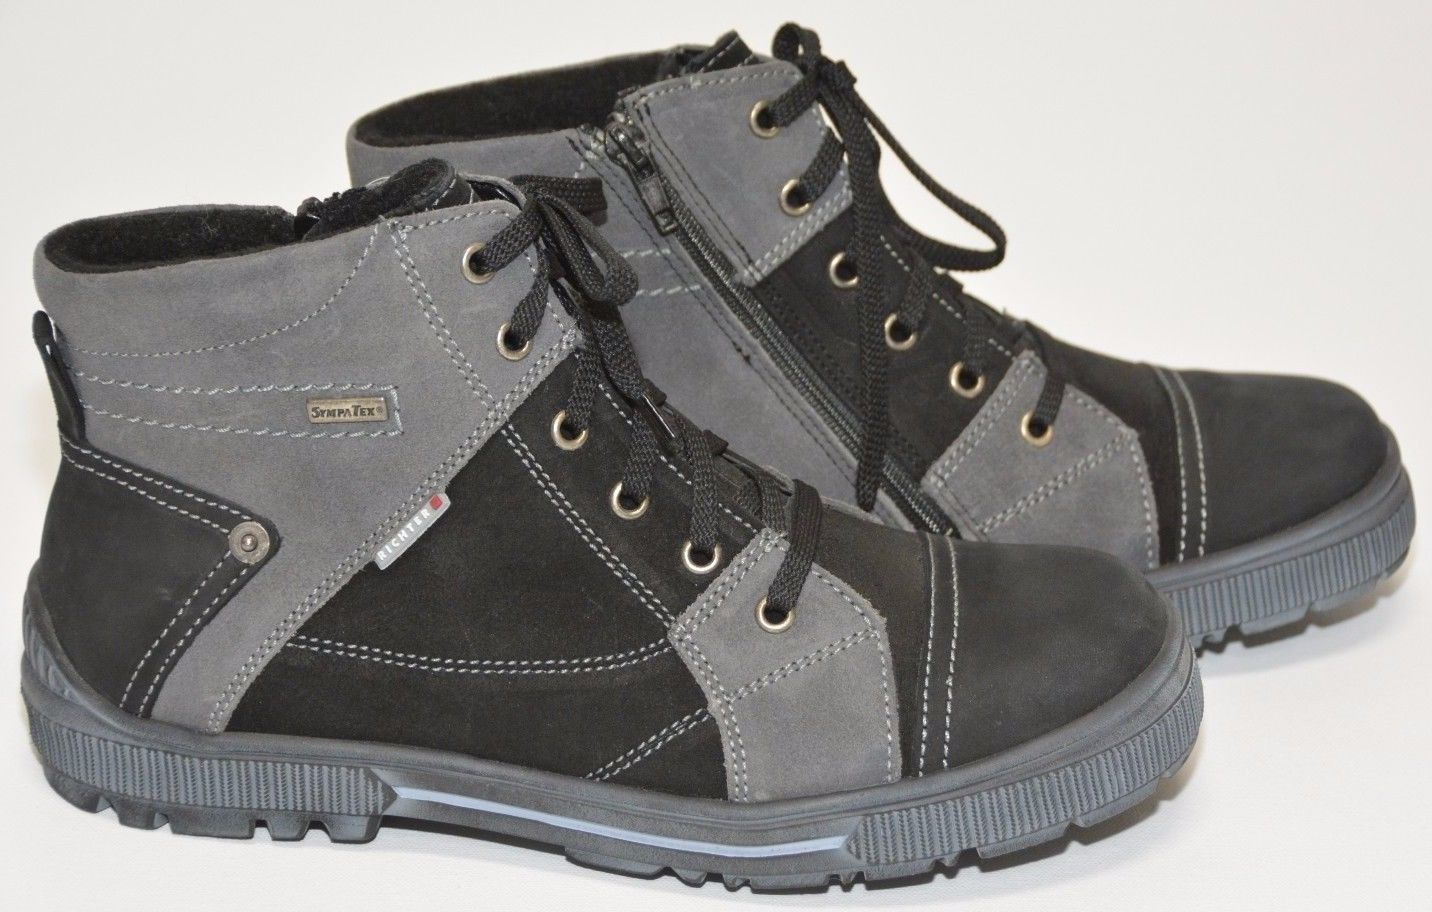 RICHTER SympaTex Boys Black/Gray High-Top Casual Sneakers Size 39 - $42.52